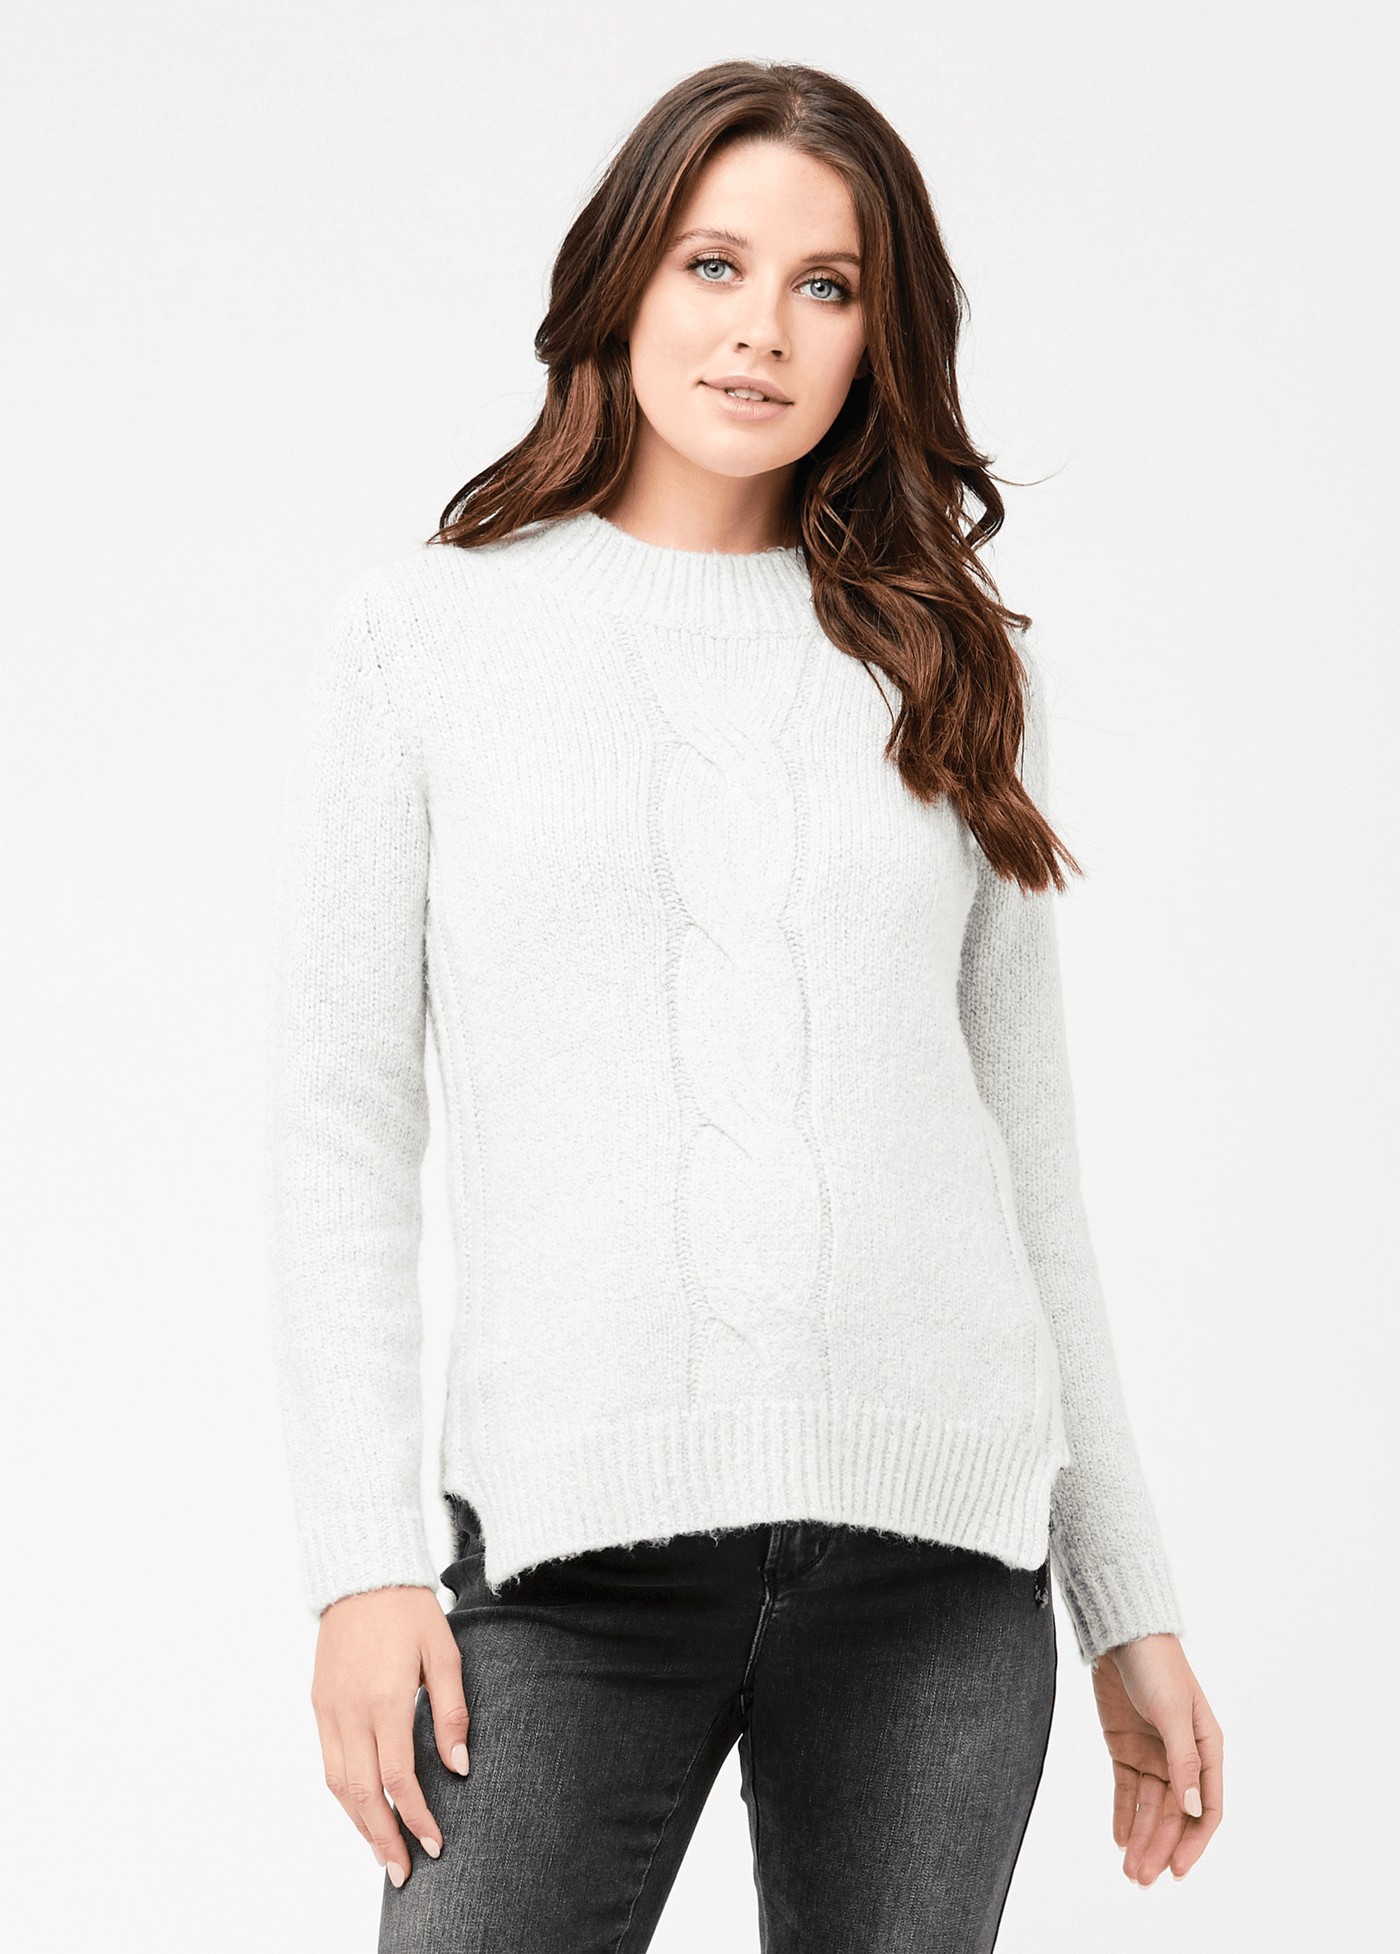 Cable Knit Nursing Sweater